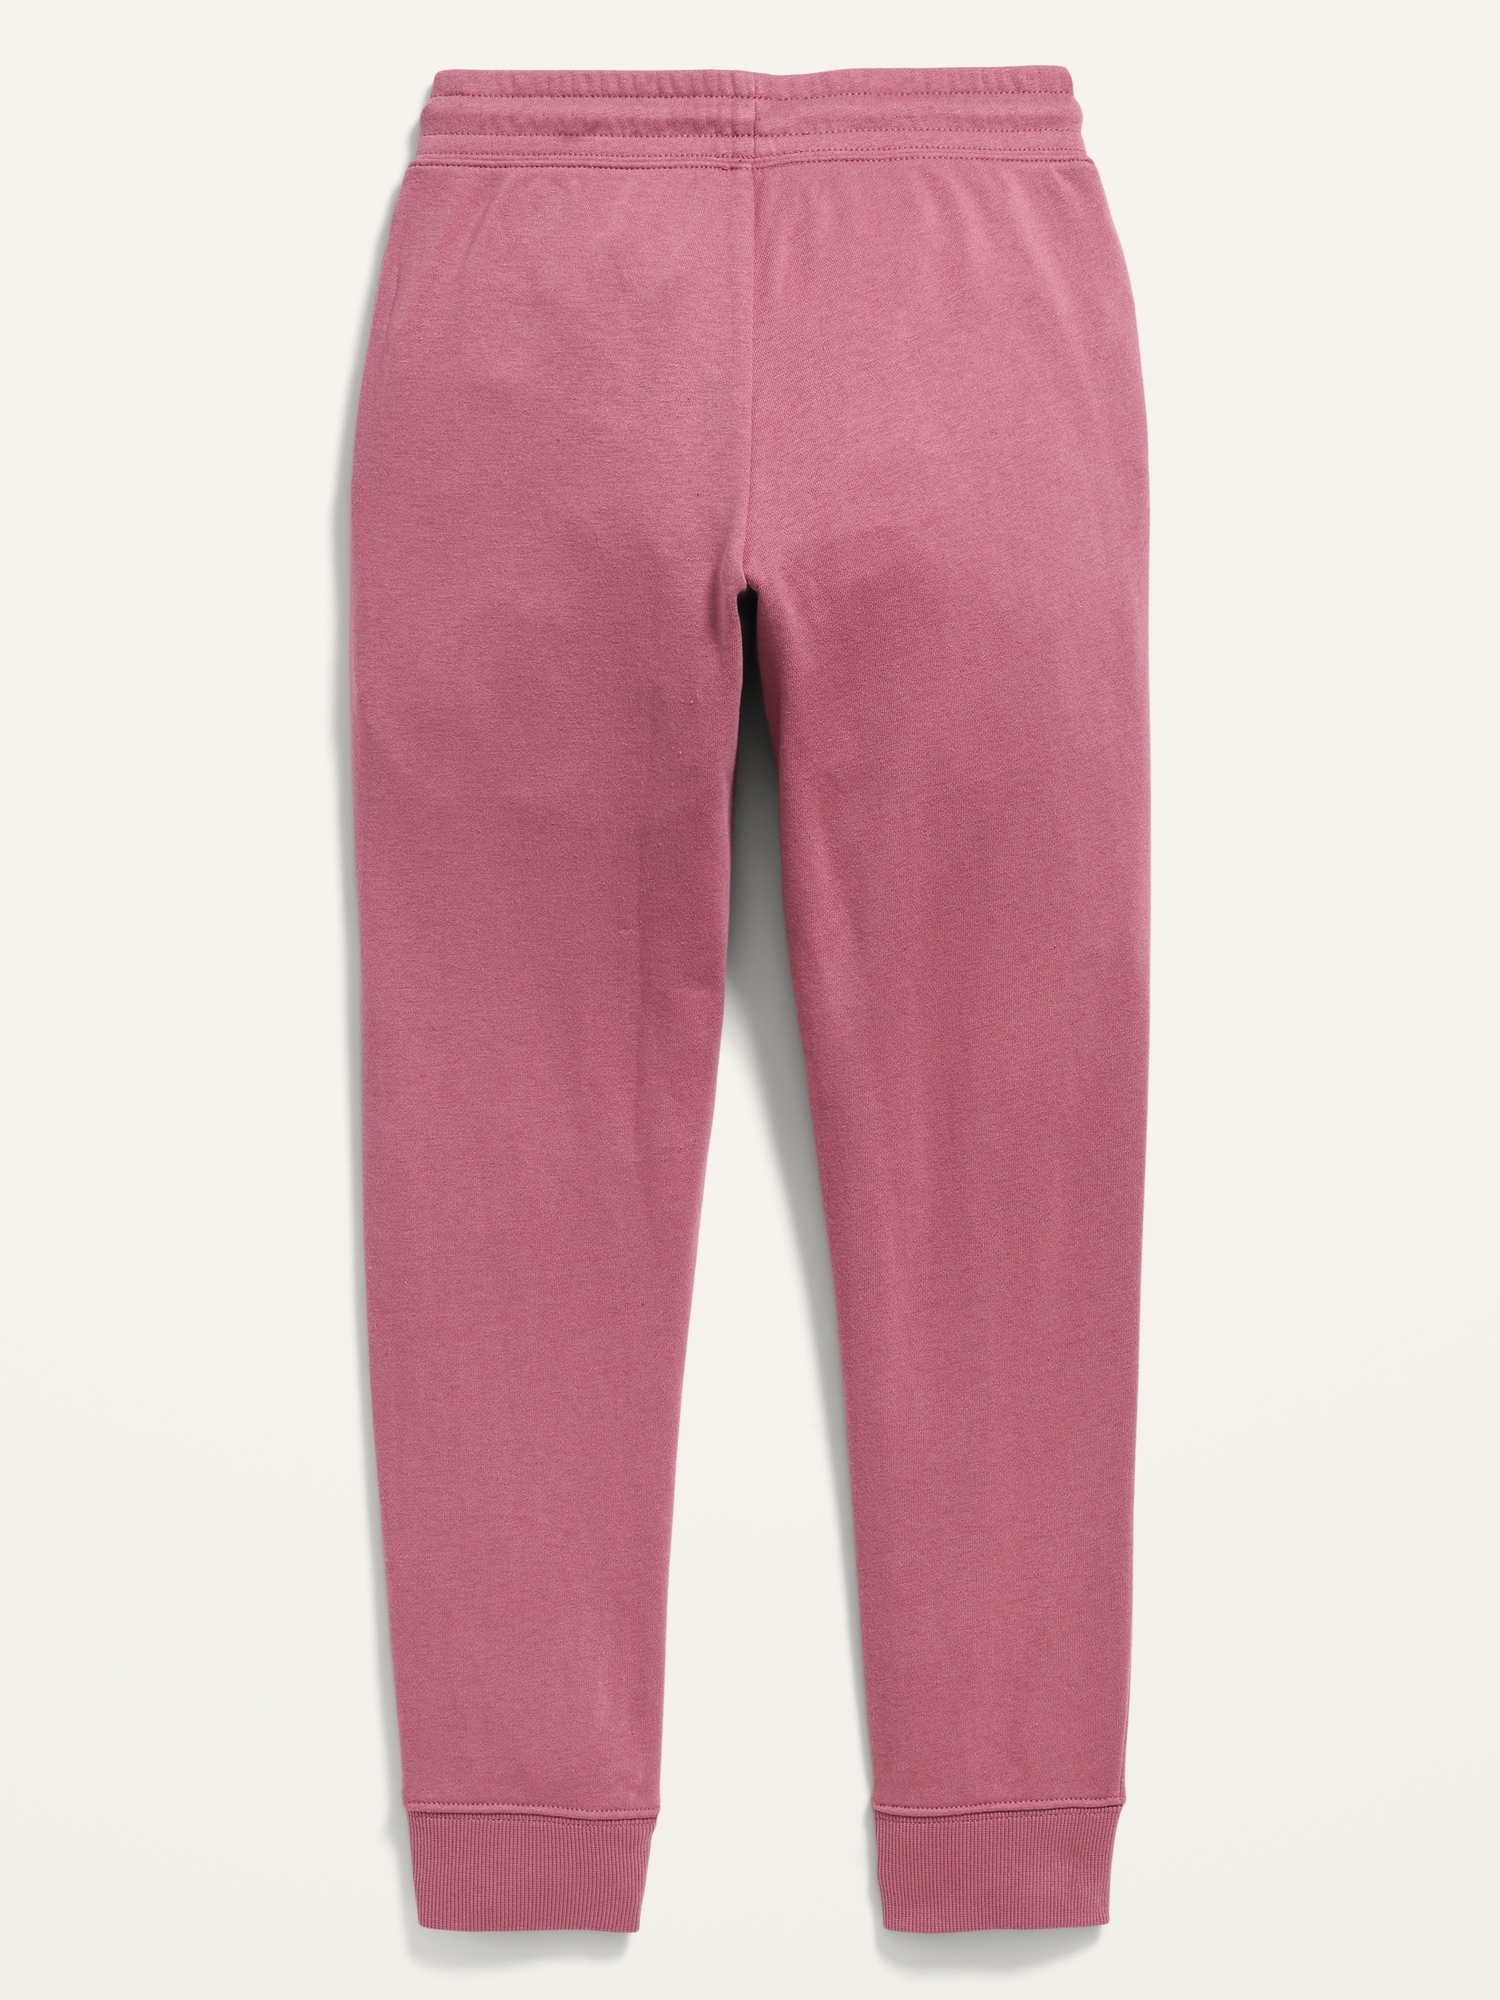 High-Waisted French Terry Jogger Sweatpants for Girls | Old Navy